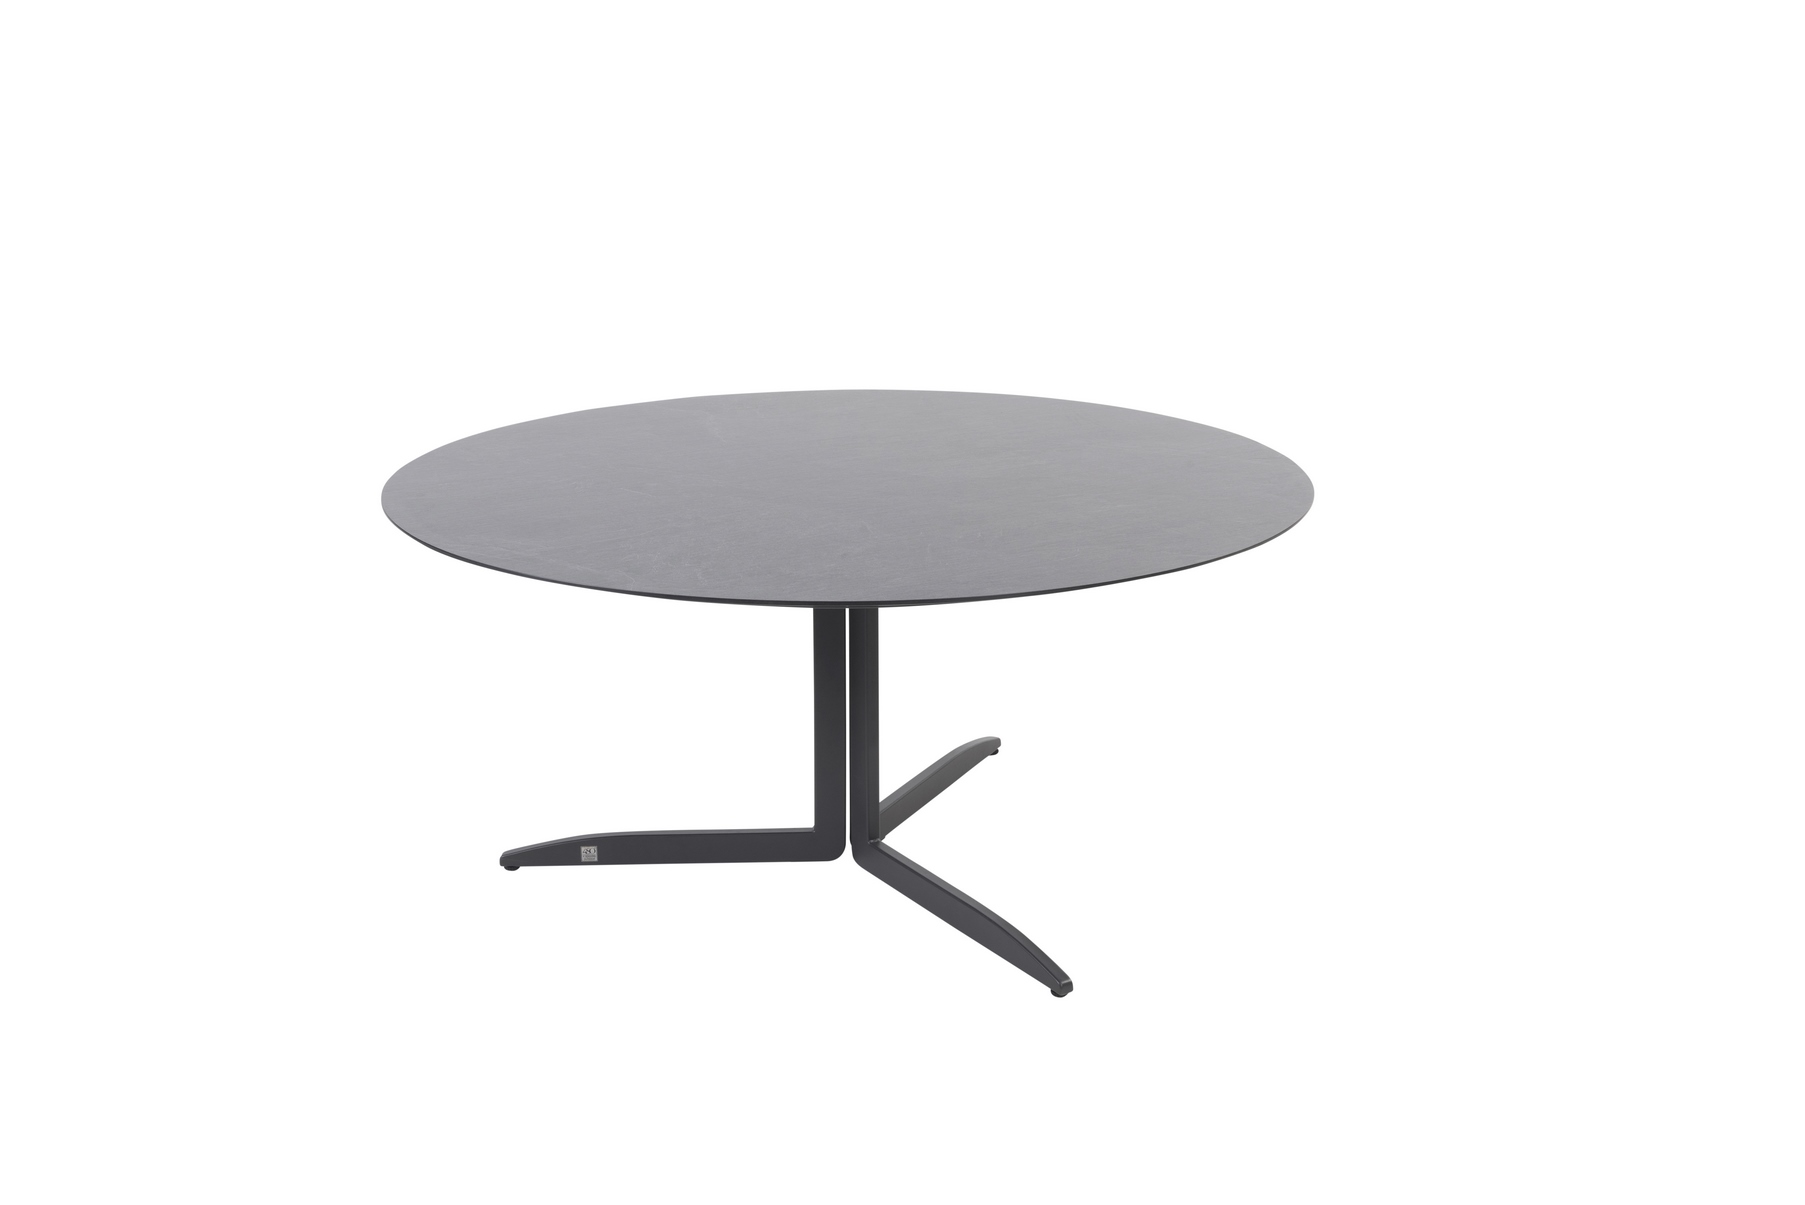 19890-19892__Embrace_dining_table_round_HPL_slate_anthracite_160cm_041.jpg